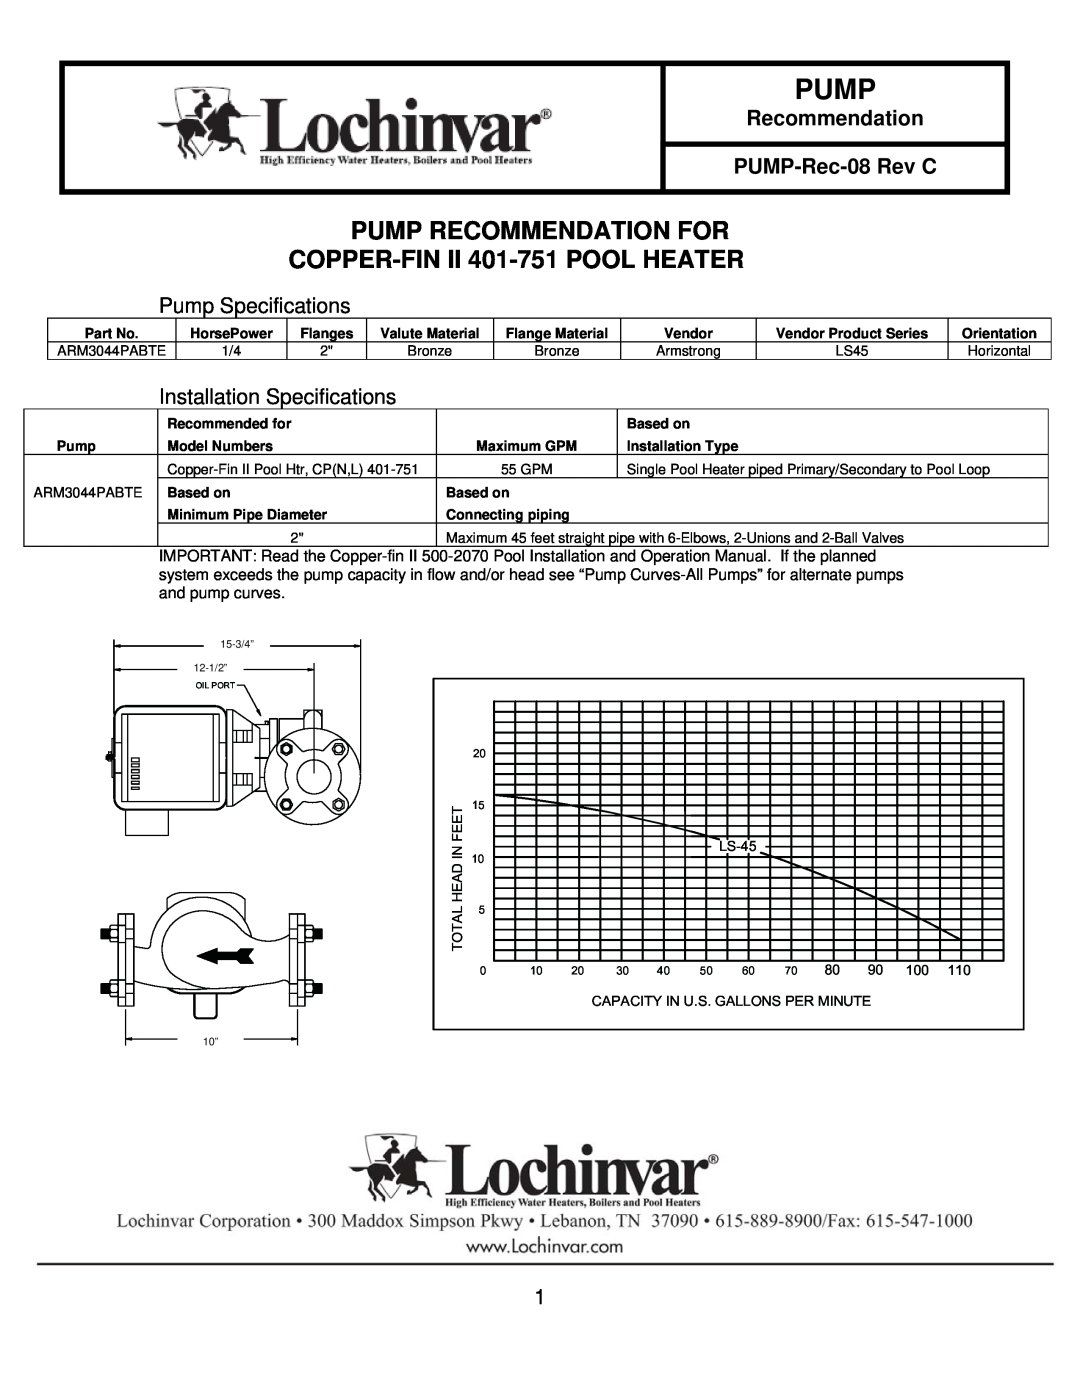 Lochinvar specifications Pump Recommendation For, COPPER-FINII 401-751POOL HEATER, Pump Specifications, Feet, LS-45 